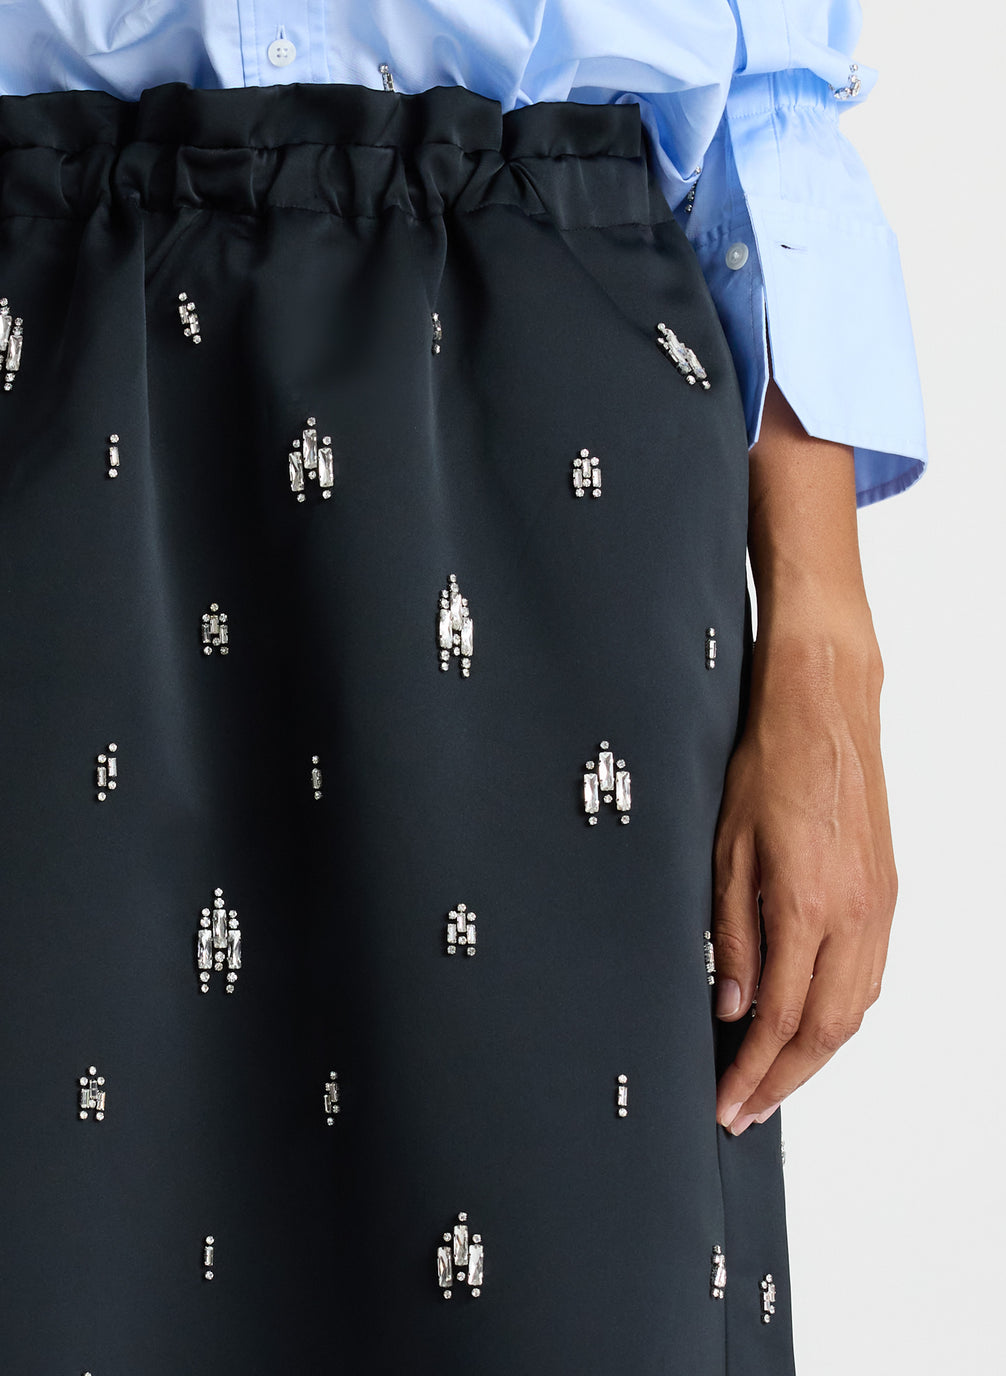 detail view of woman wearing blue embellished button down top and black embellished midi skirt